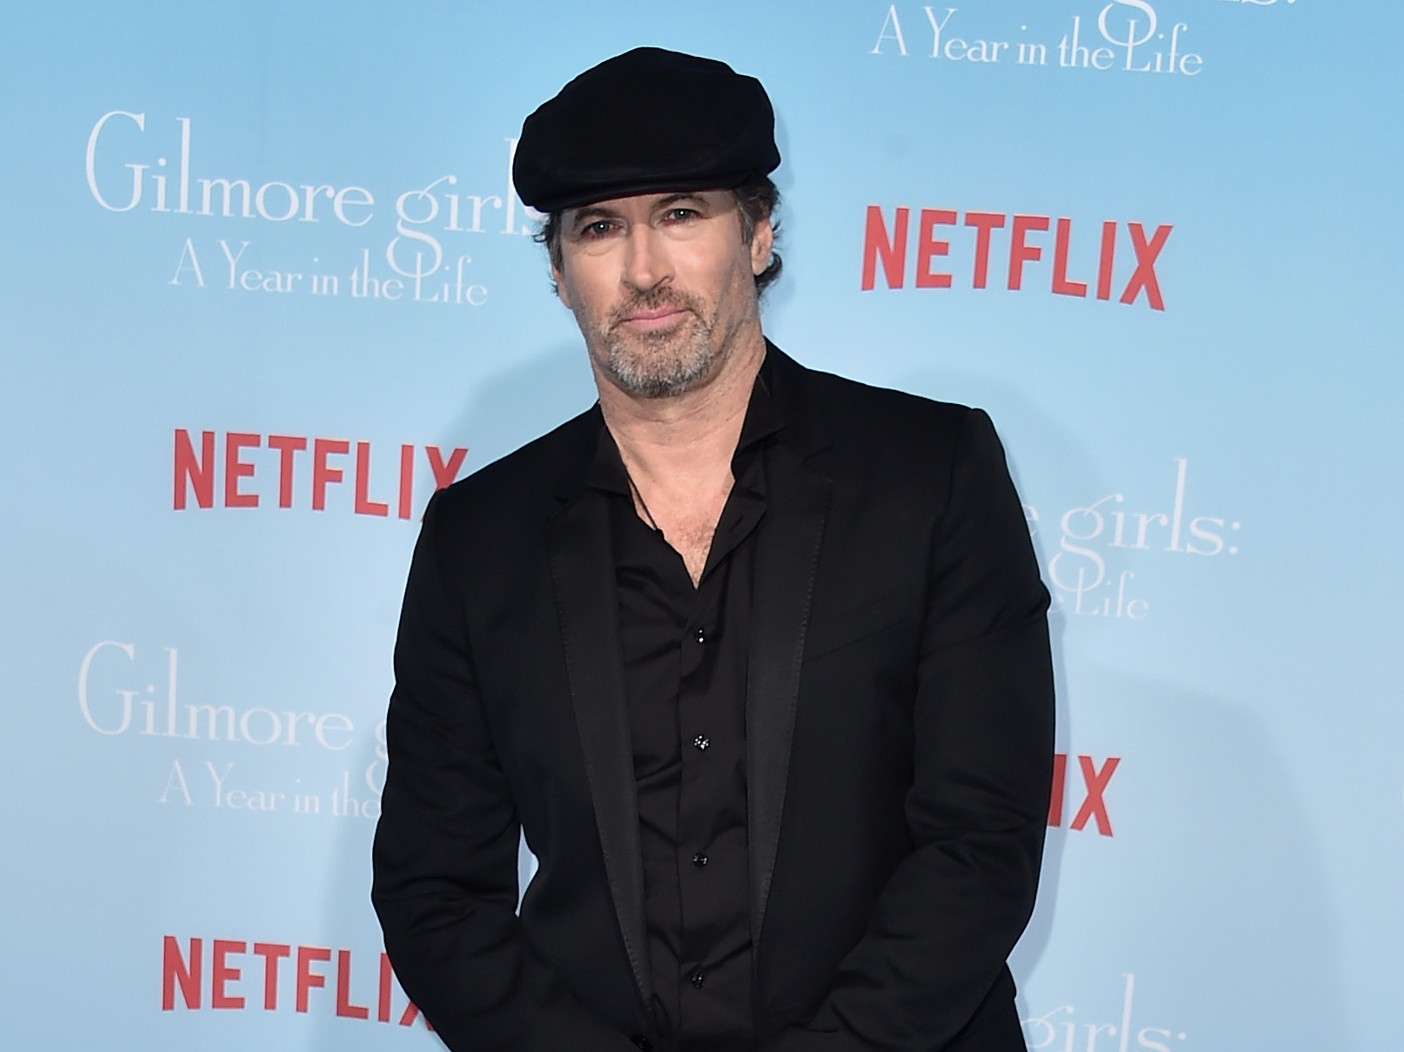 Scott Patterson Shares Why Filming One Episode Of ‘Gilmore Girls’ Disturbed Him